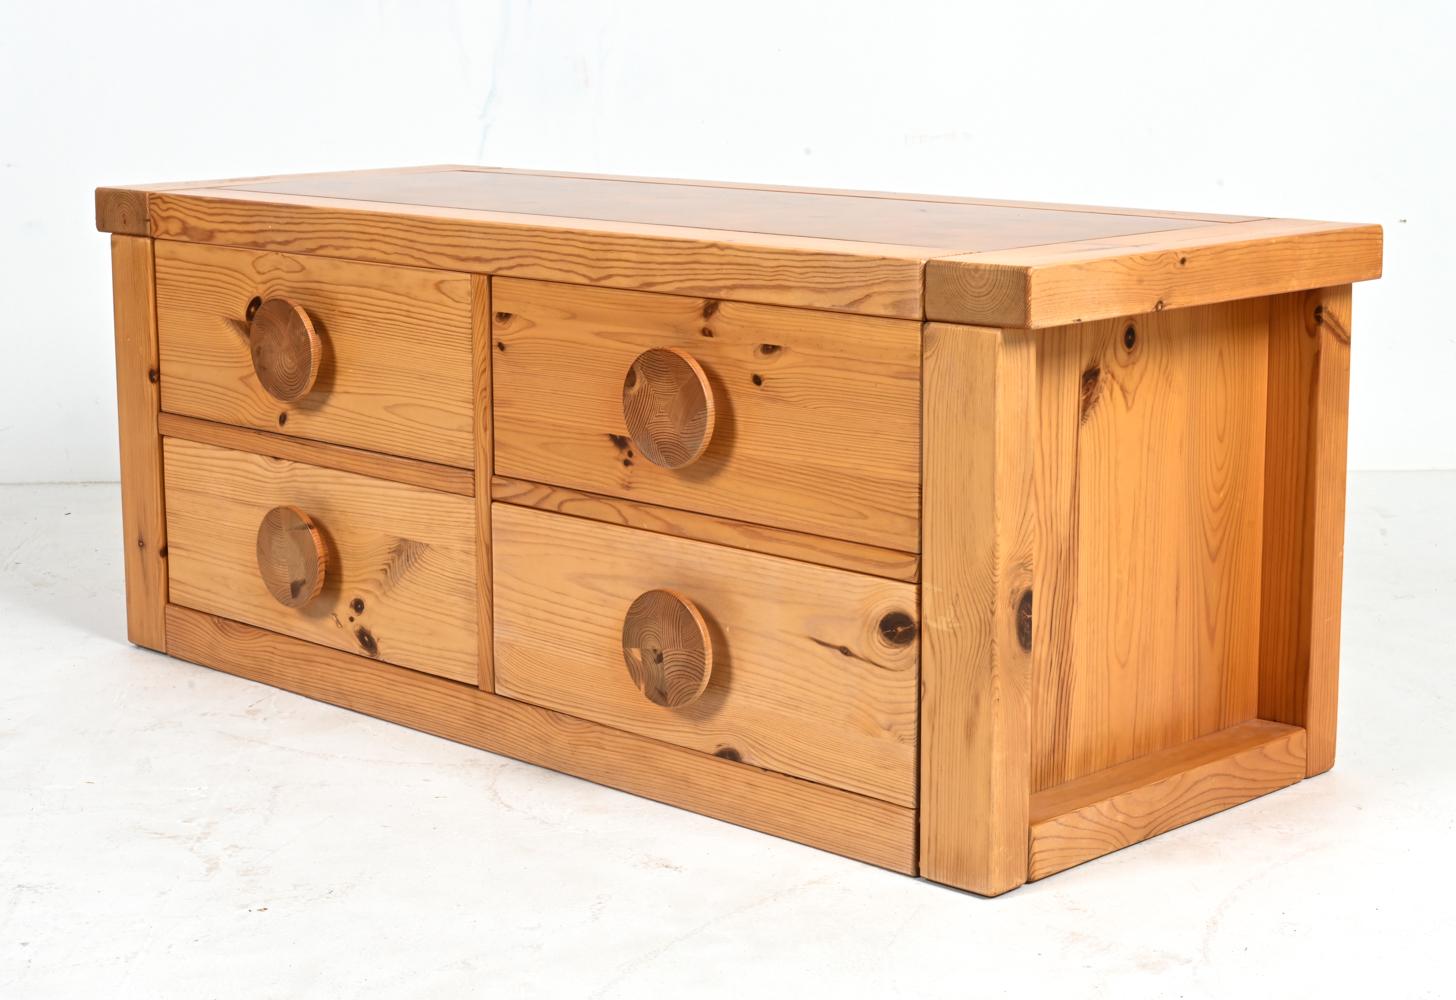 Scandinavian Modern Rolf Middleboe for Tranekær Pine Parquetry Chest, 1970's For Sale